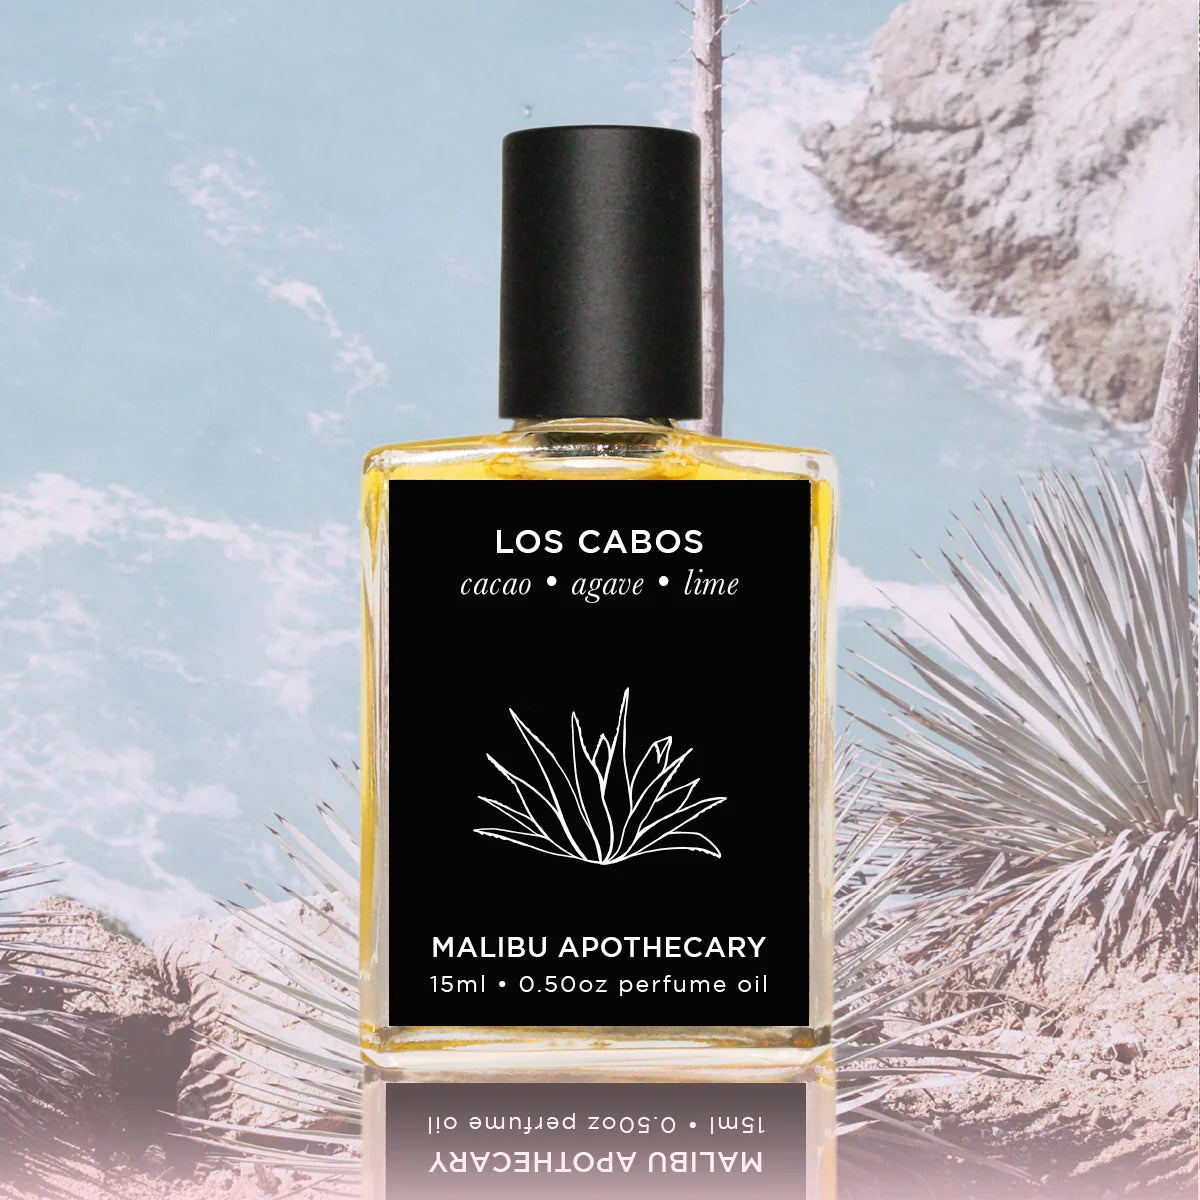 A bottle of Faire's Soleil Roller Parfum labeled "Los Cabos cacao • agave • lime" against a textured background with palm fronds and a sky-like effect. The image is stylized with a bungalow-style artistic flair.